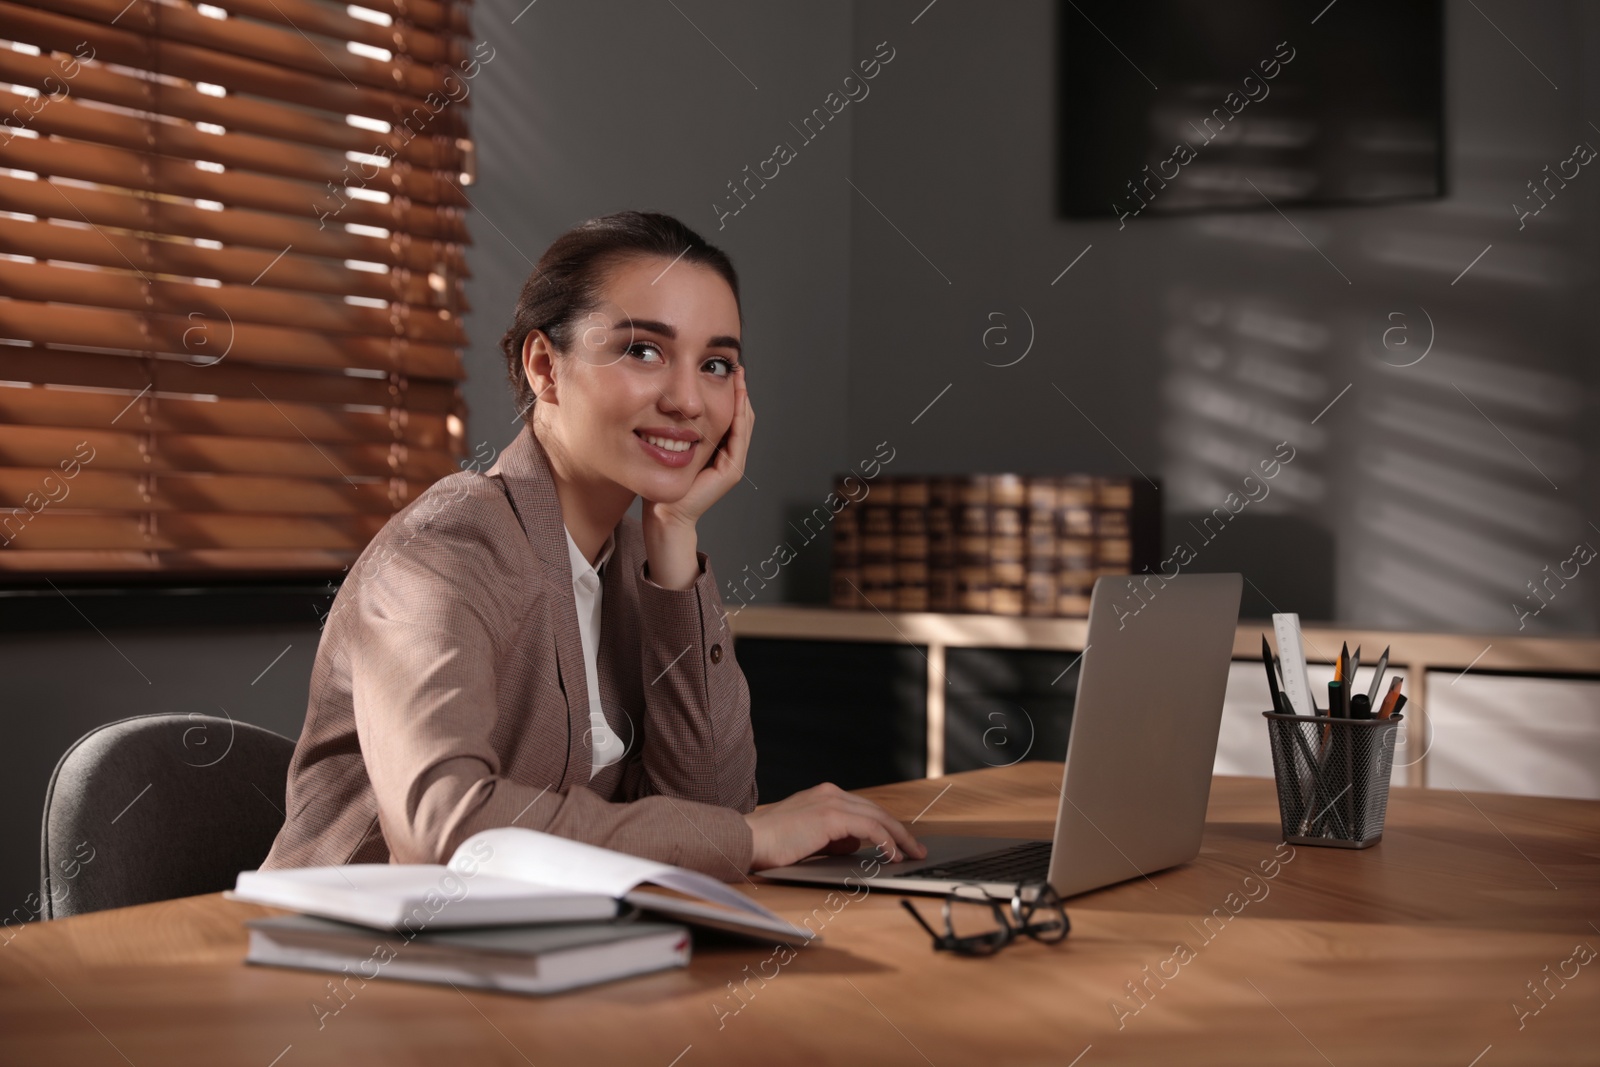 Photo of Woman working with laptop at wooden desk in office